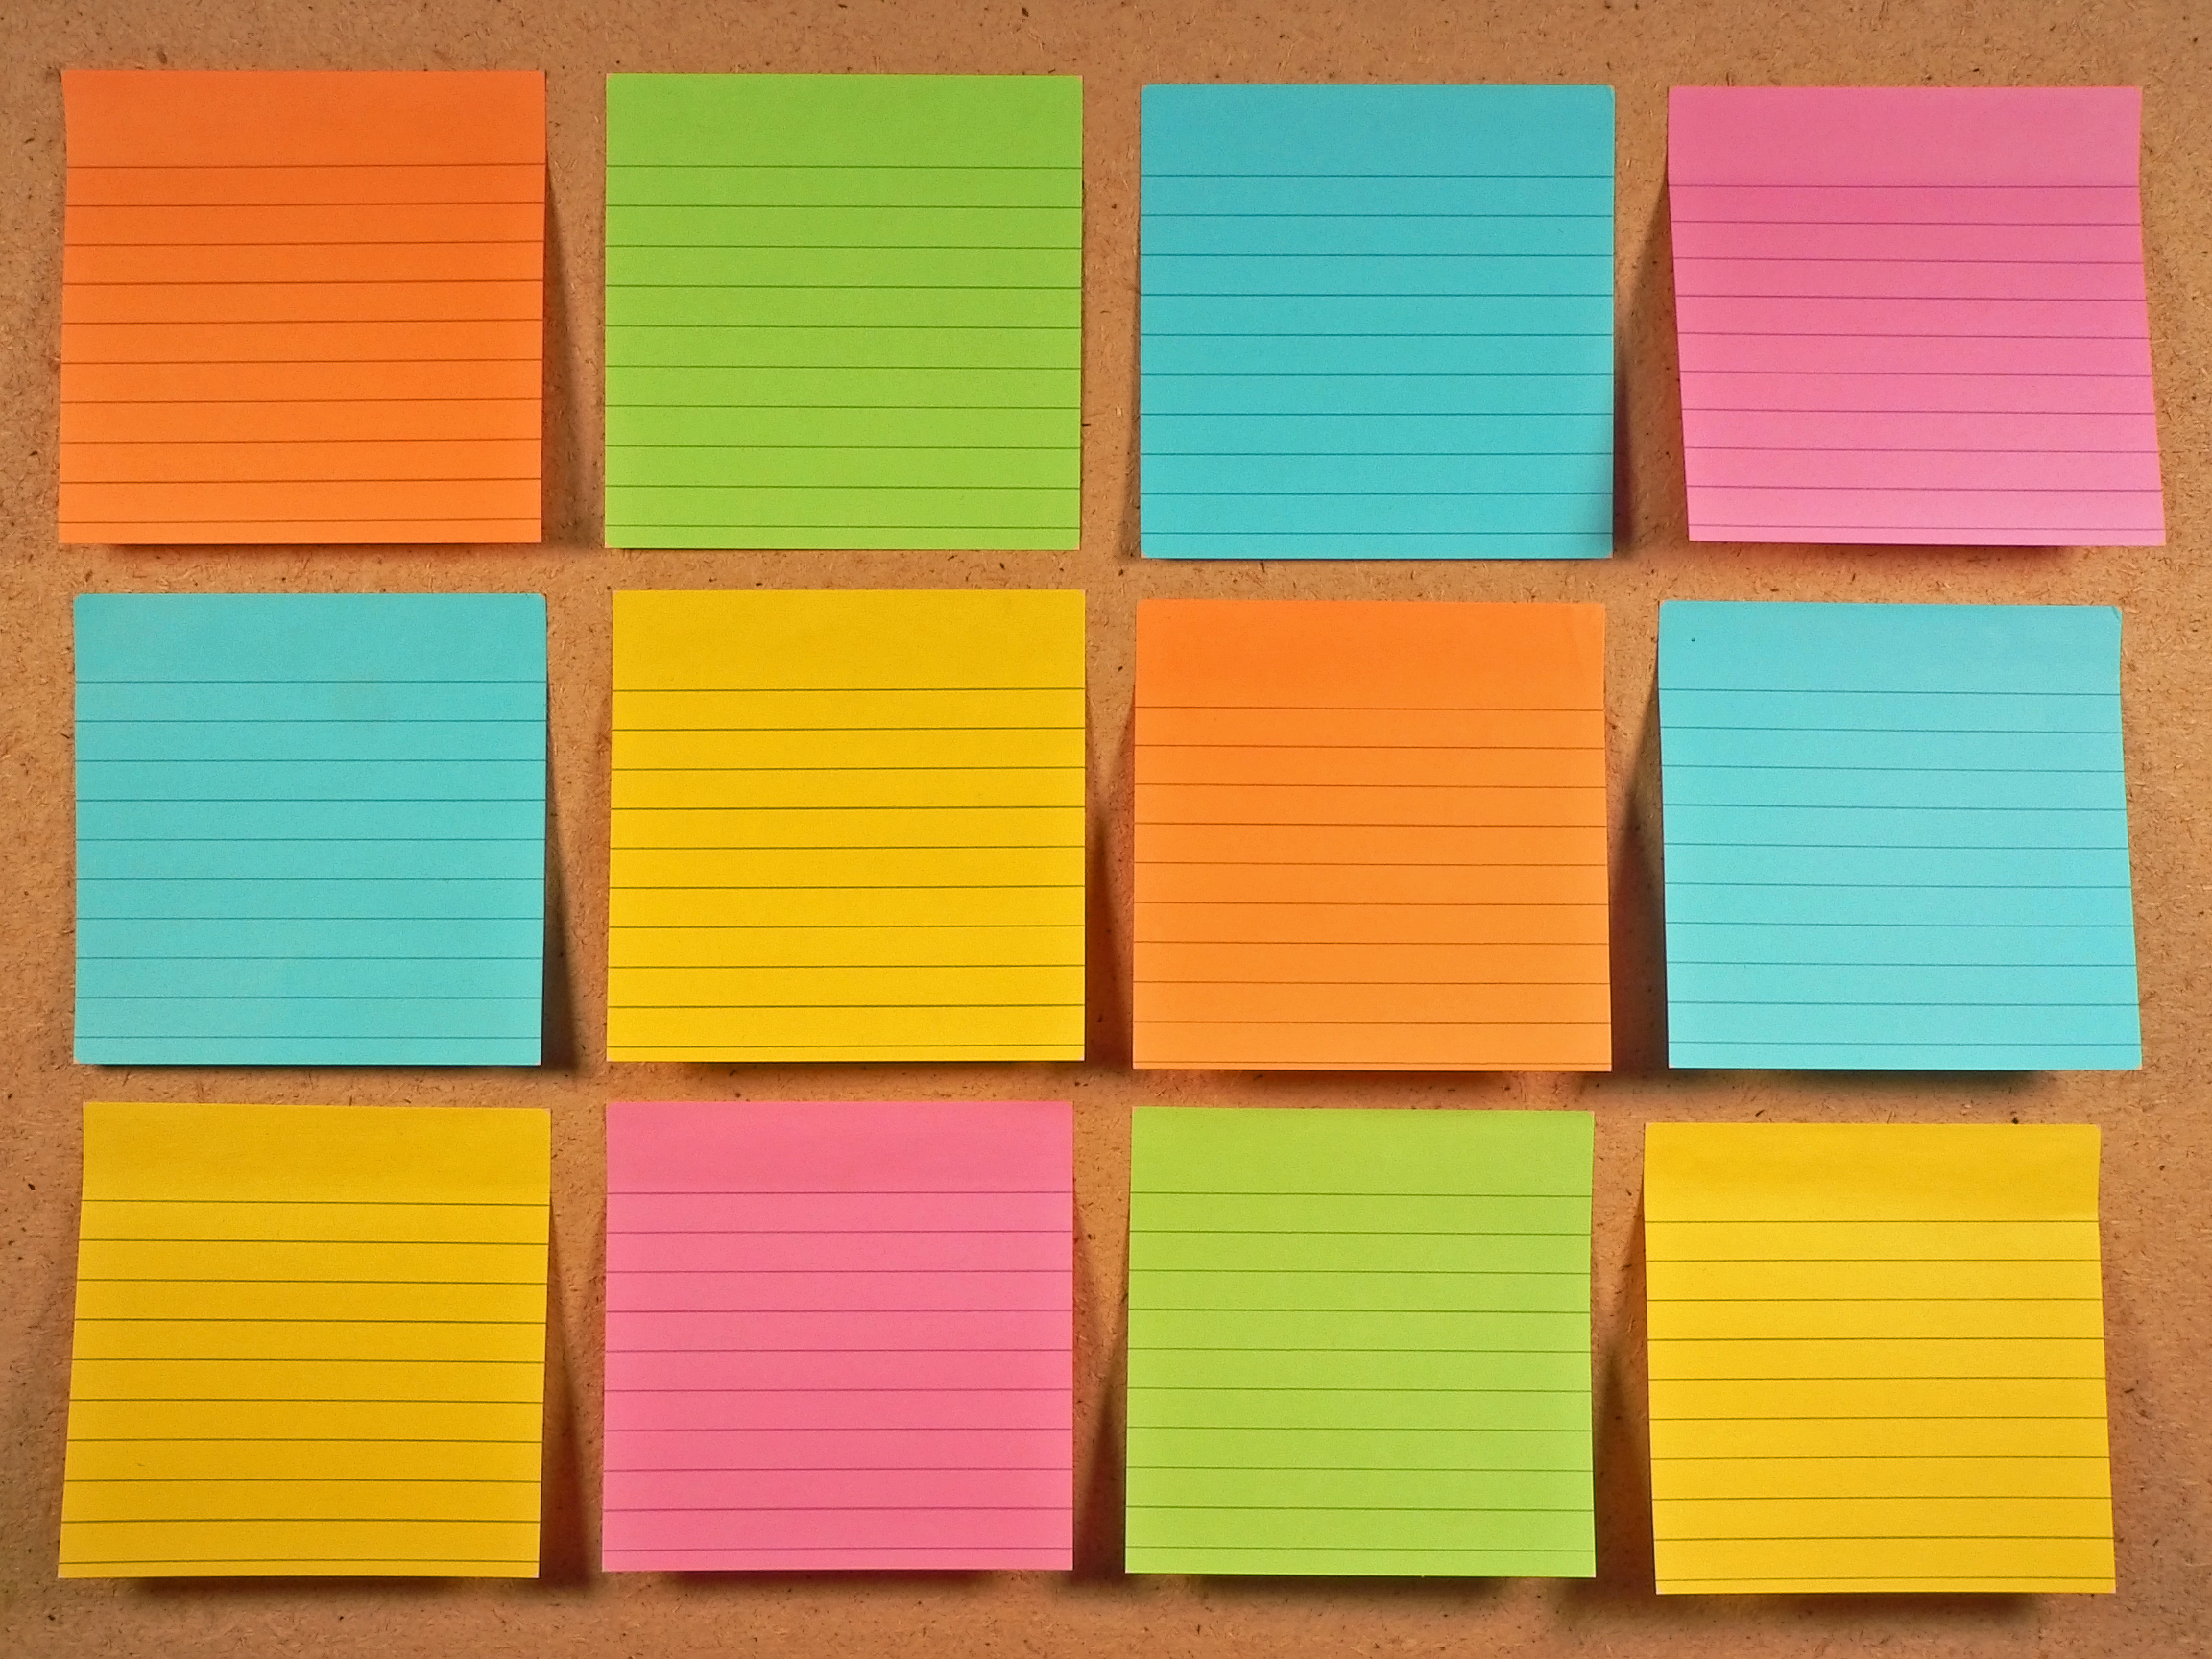 sticky note wallpaper, post it note, turquoise, orange, rectangle, paper product, tints and shades, construction paper, square, paper, wood